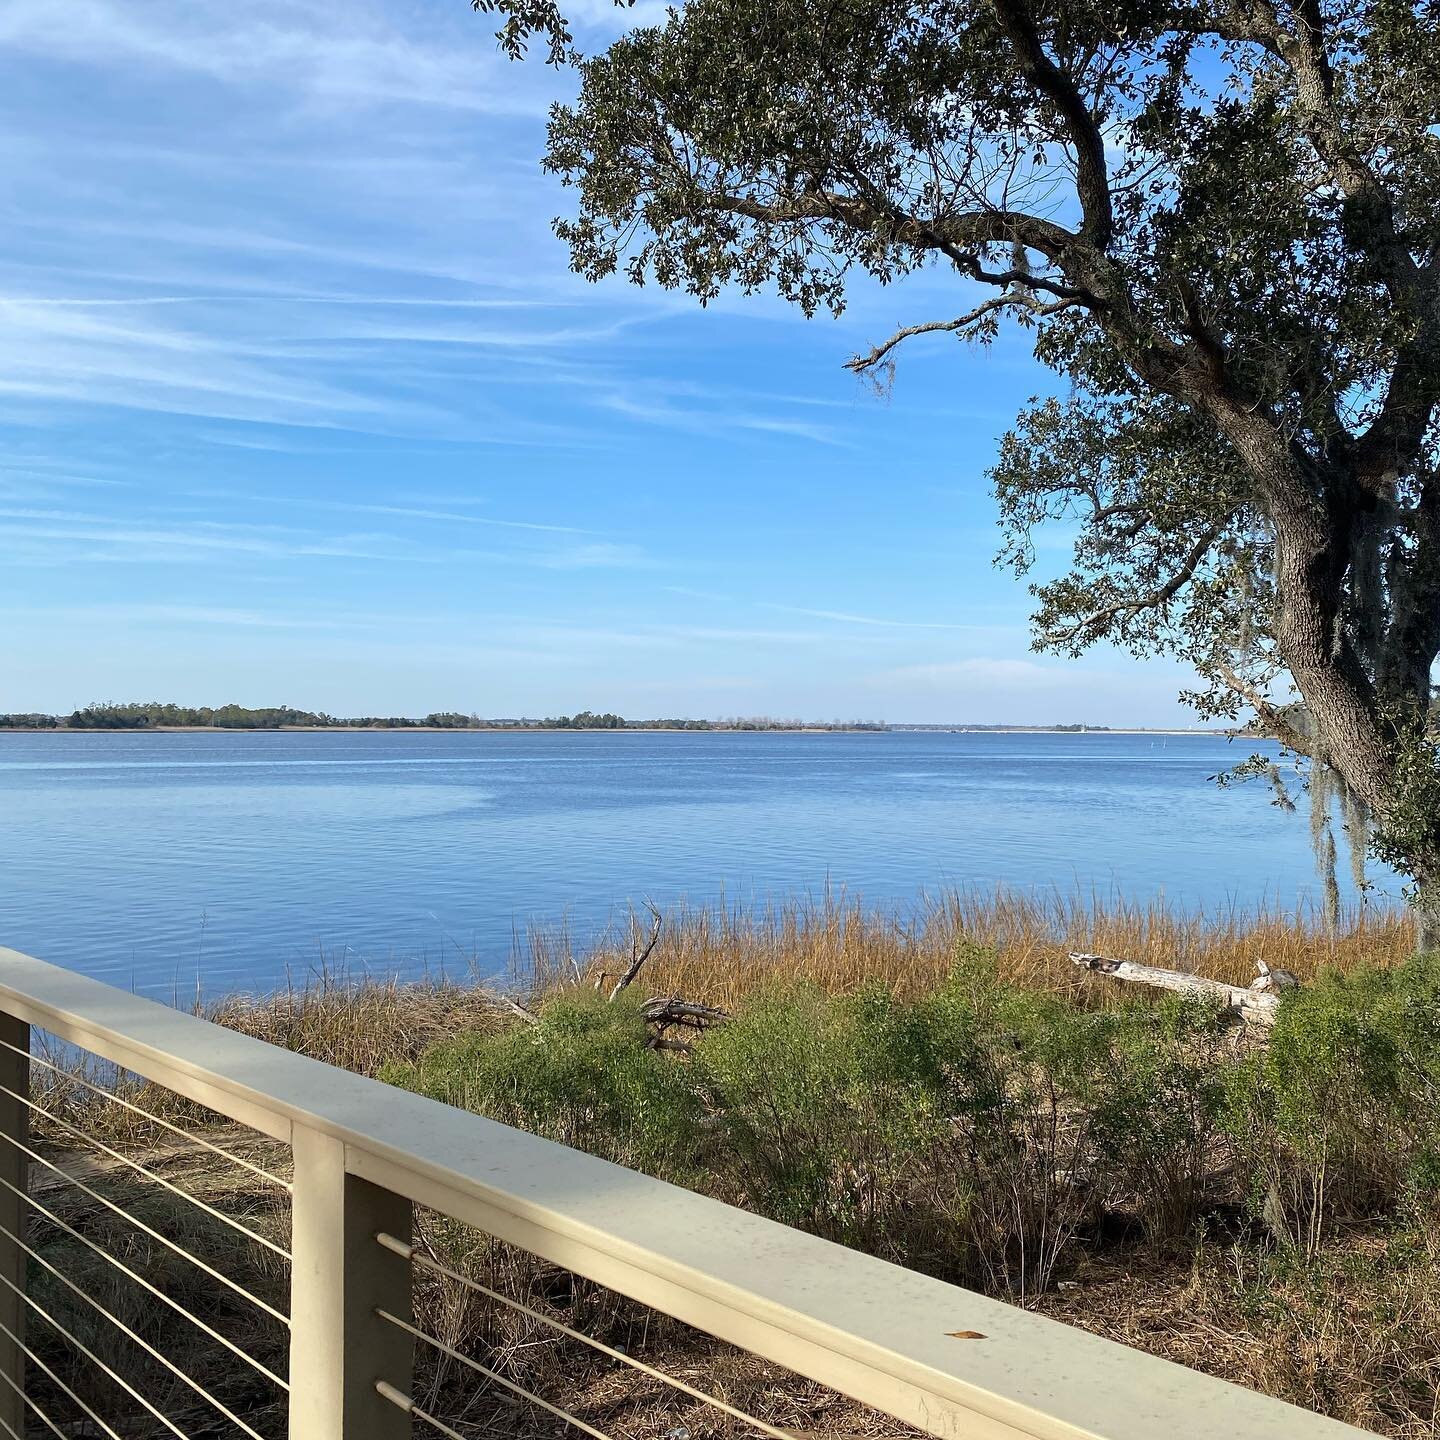 This might have been the ticket!!

Between the water views, dock, and amenities offered&hellip; in 2.5 days, we narrowed our buyers down from 250 homes in 5 counties to one neighborhood!!! Now we can really hone in their search to find them their ide